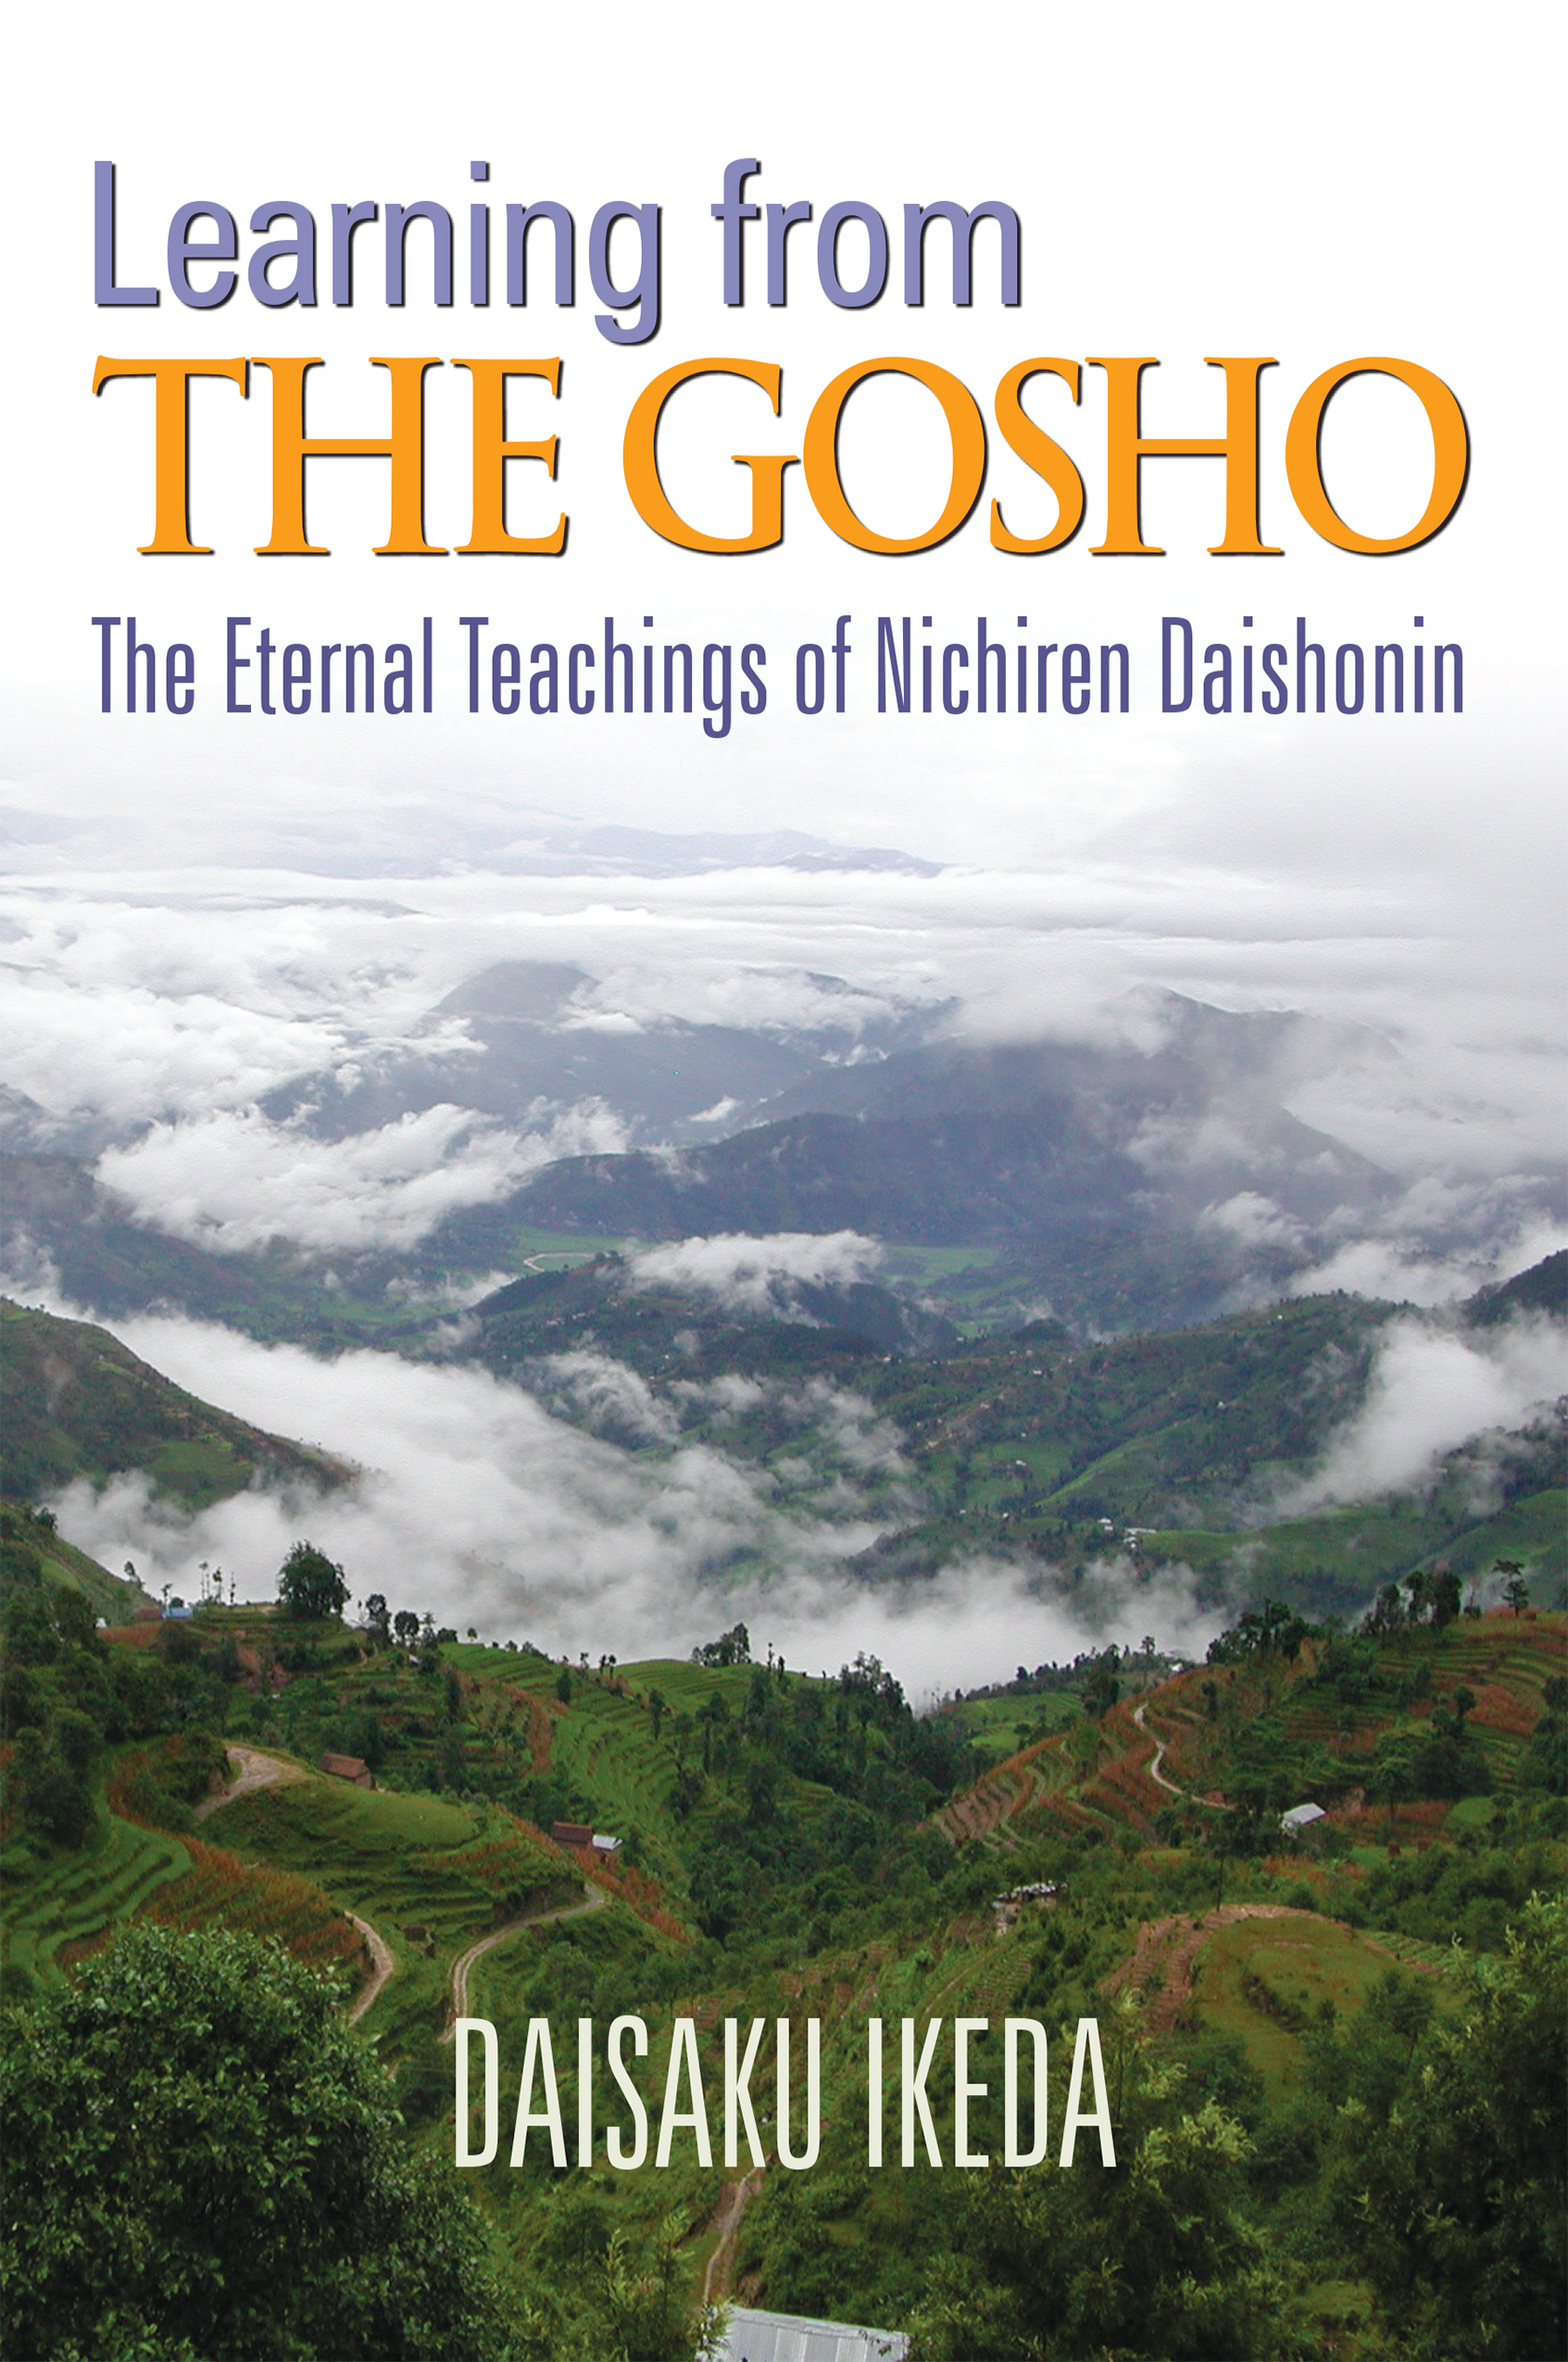 Learning from The Gosho - Eternal Teaching